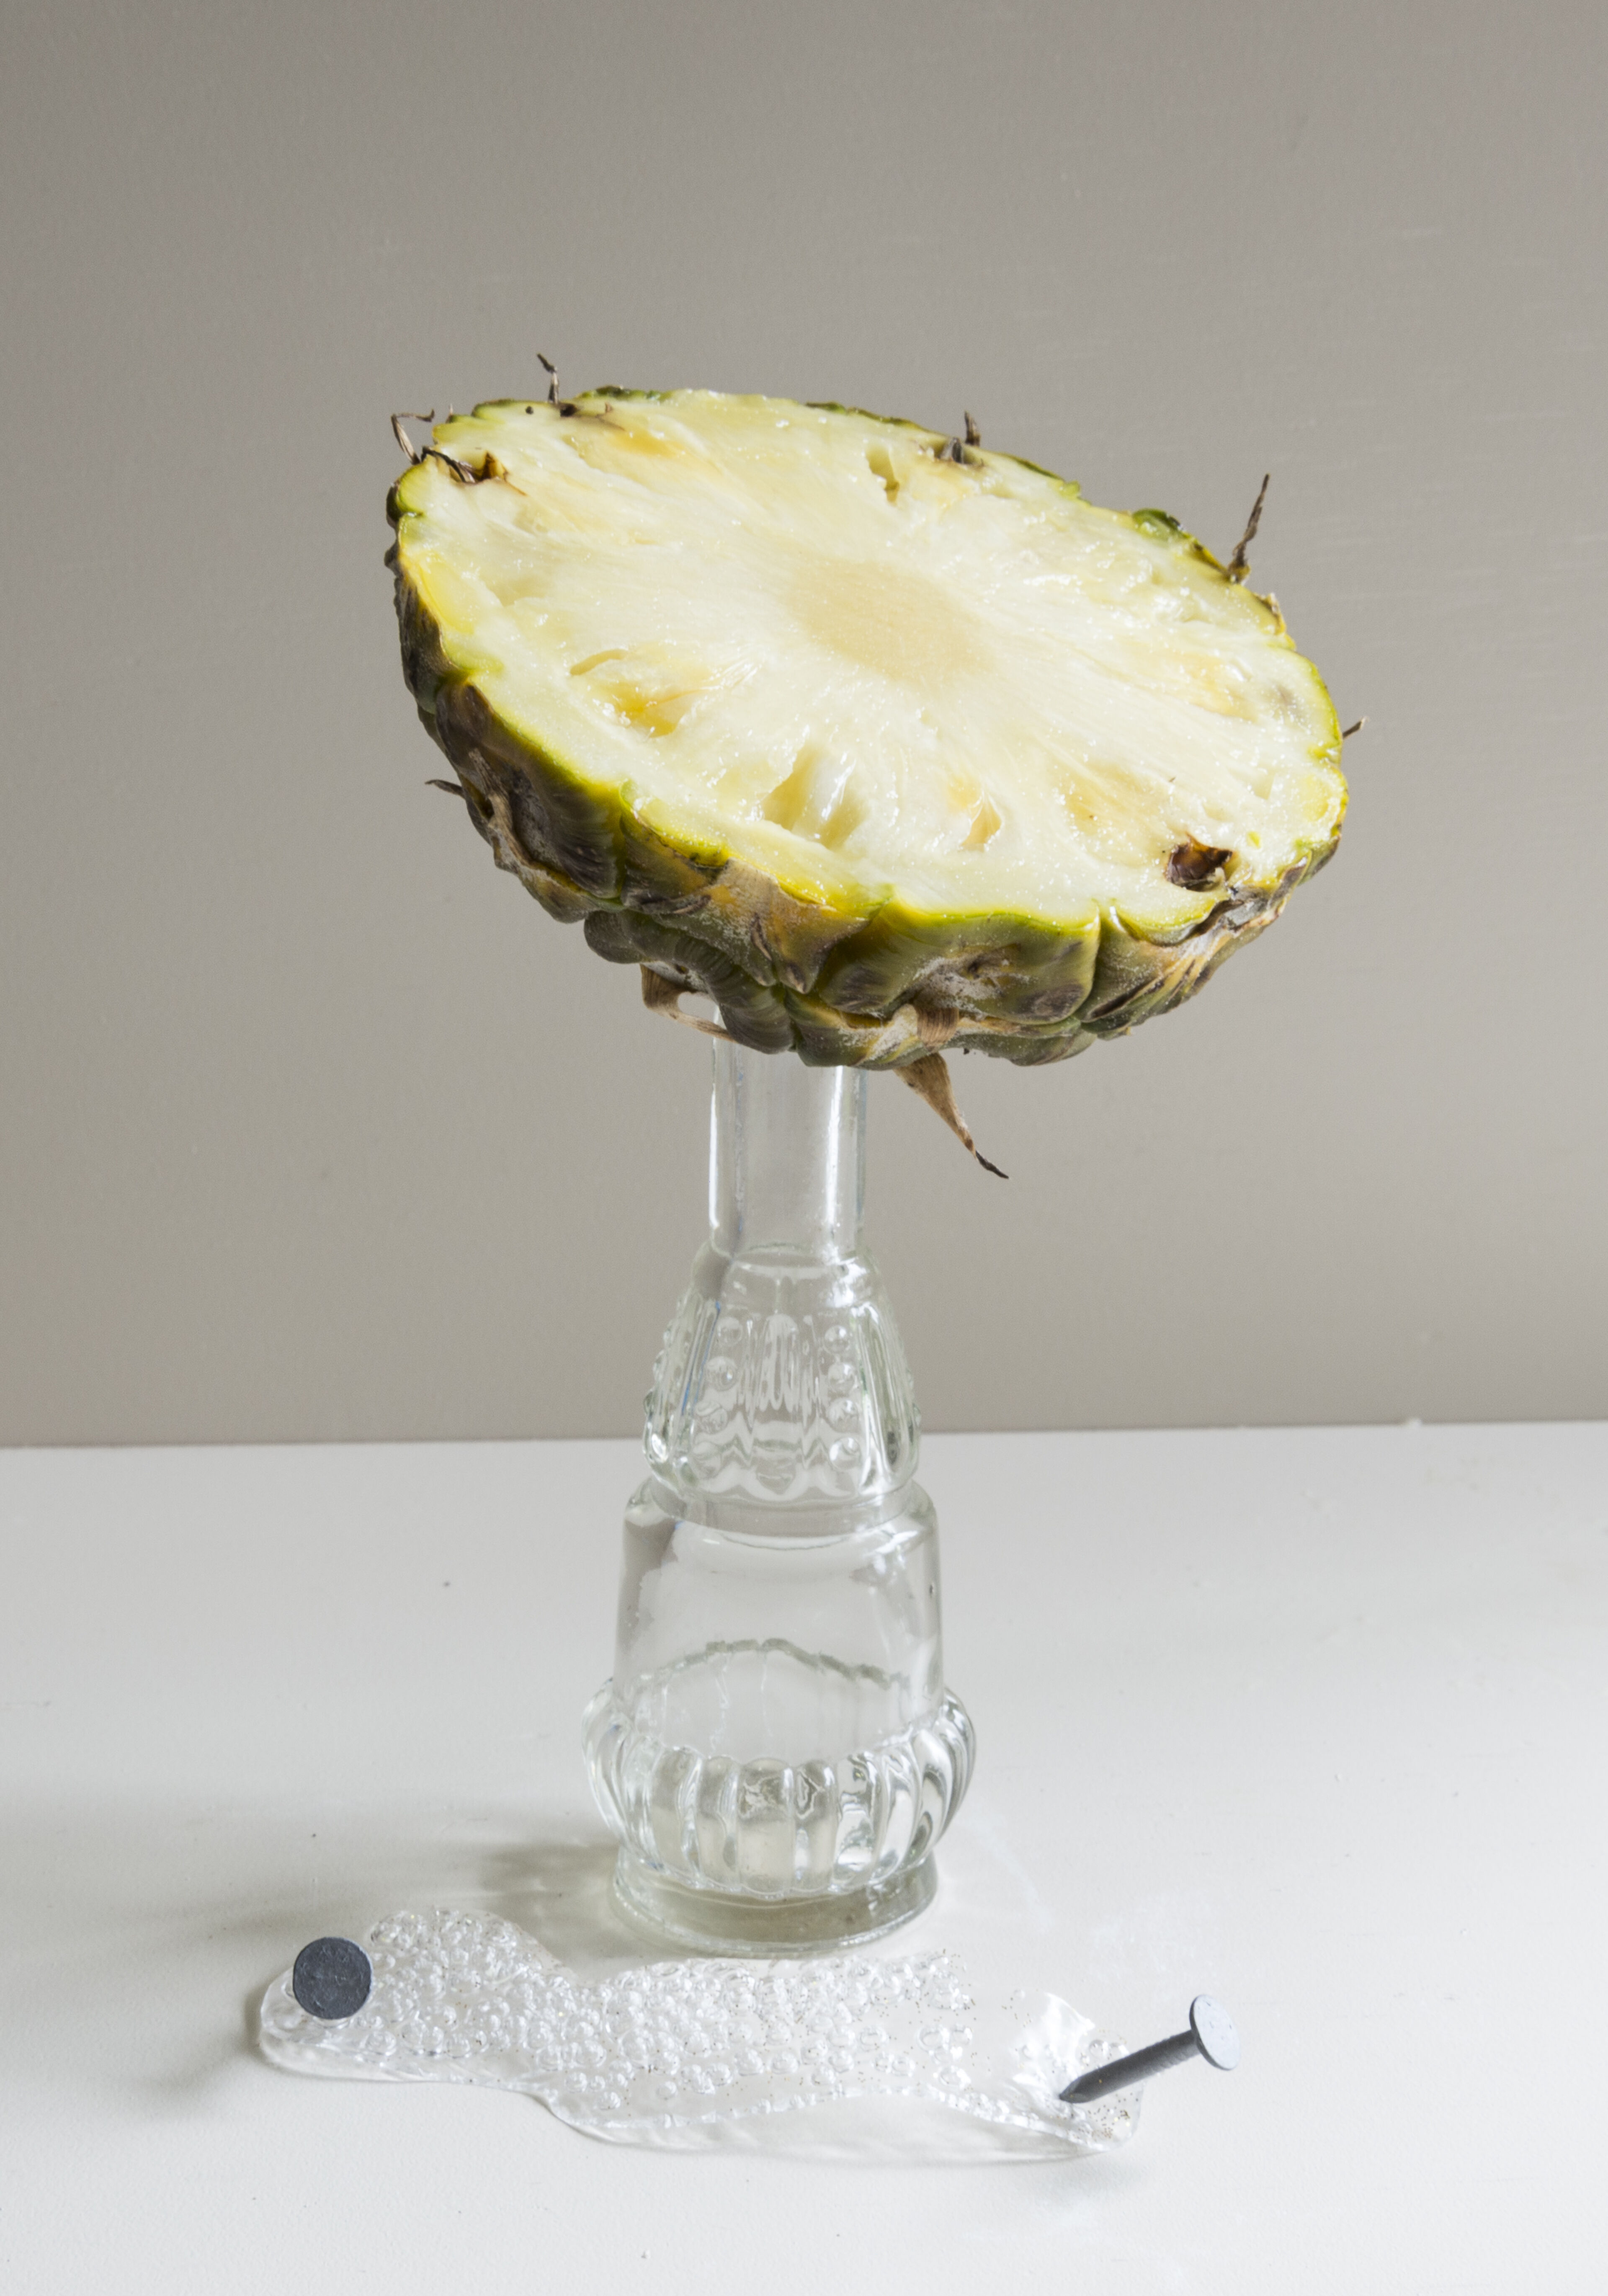 A halved pineapple presented upside-down on a clear glass pedestal, with artistic flair.